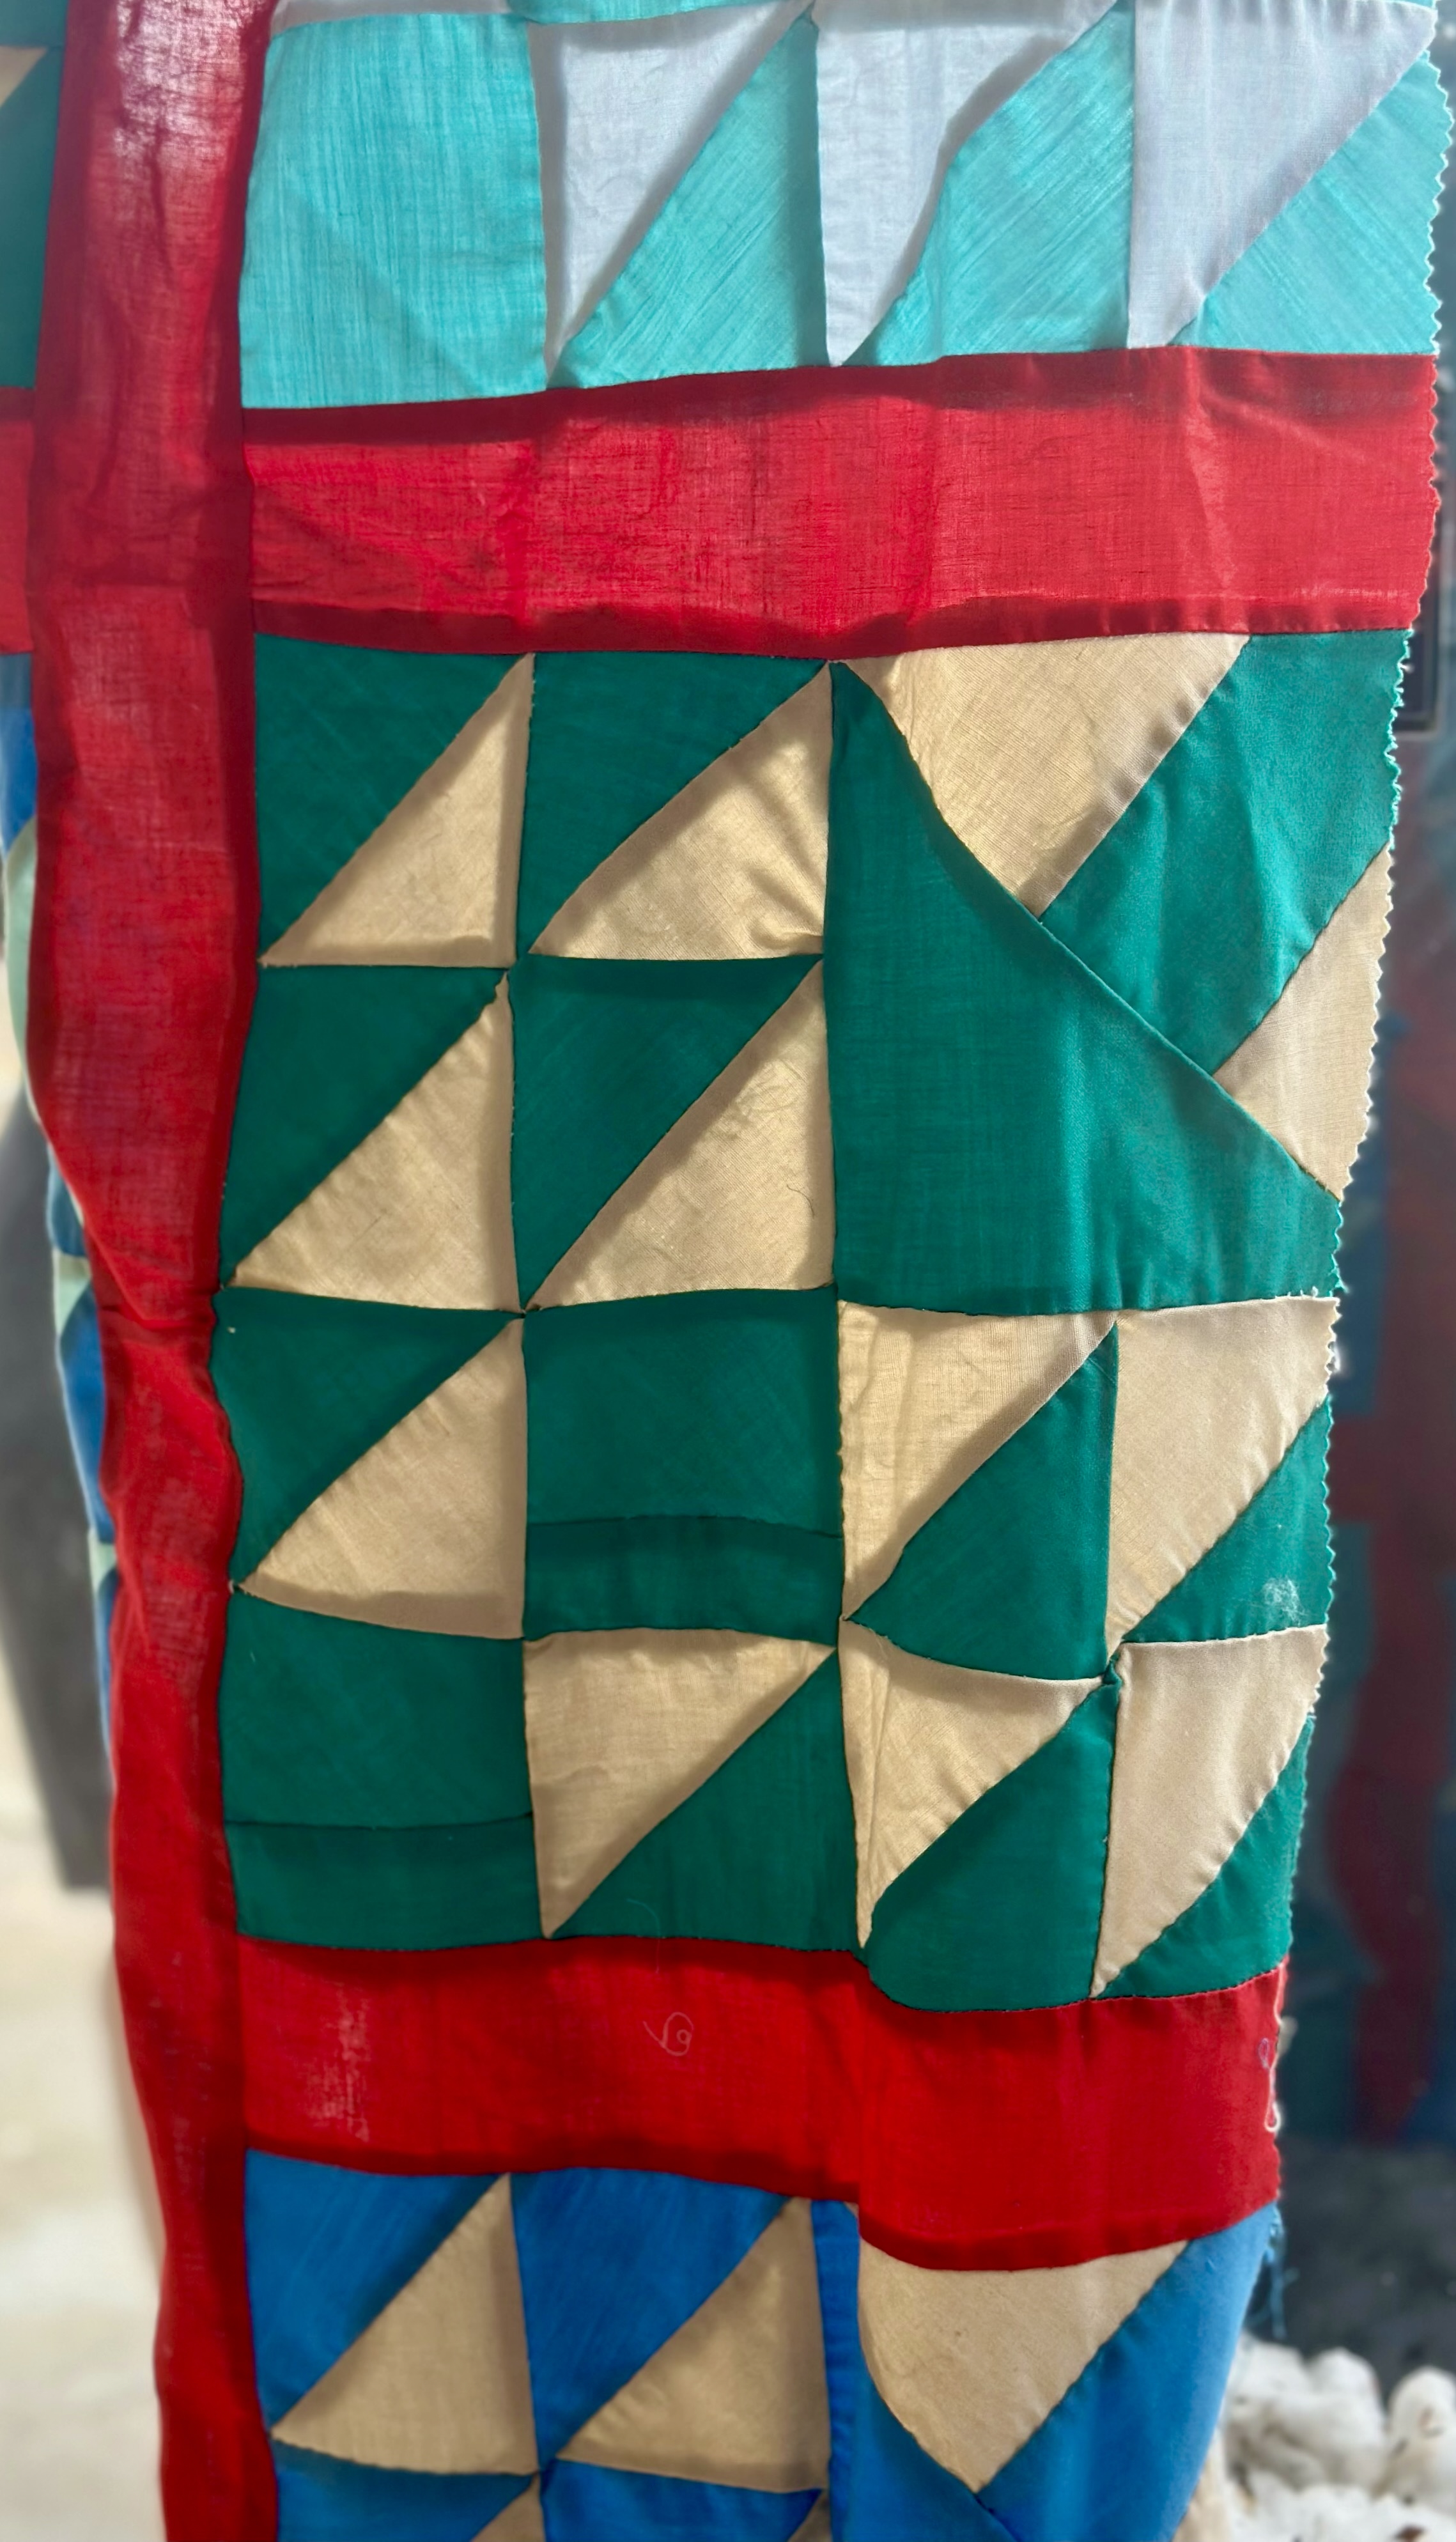 This quilt, depicting the “Flying Geese” pattern, was among many on display.